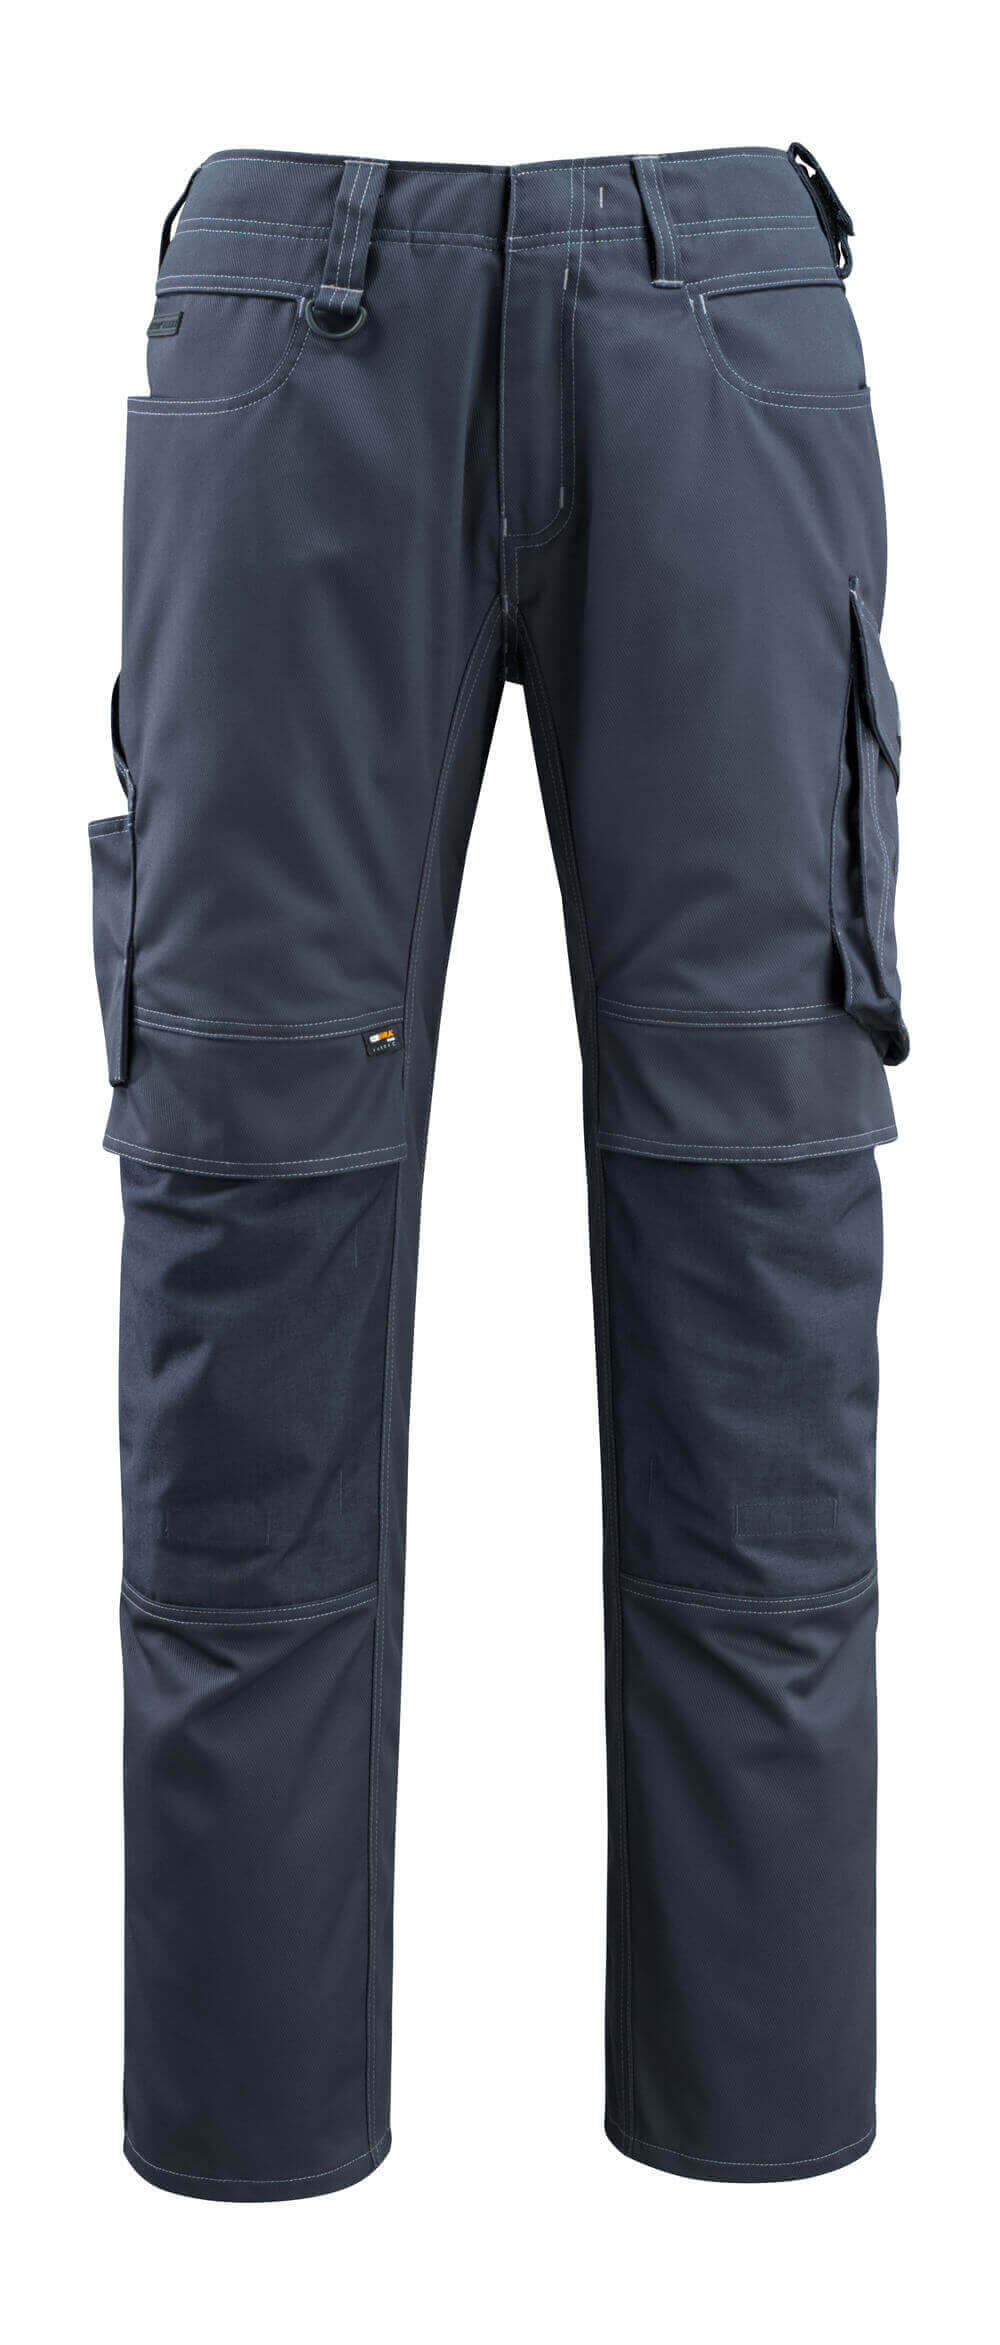 12479-203-010 Trousers with kneepad pockets - dark navy